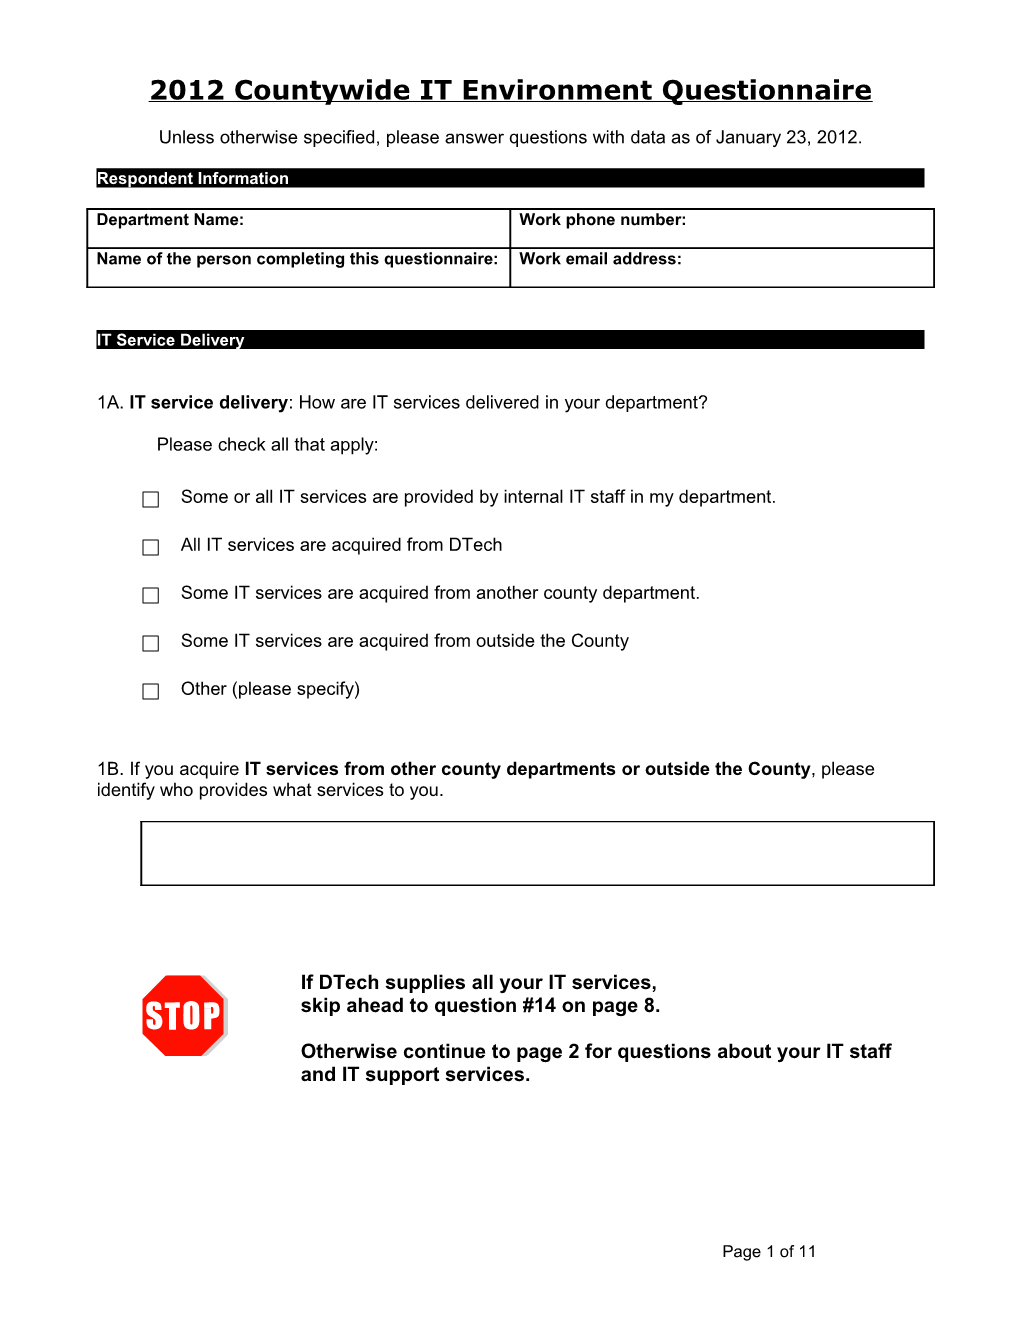 2012 Countywide IT Environment Questionnaire